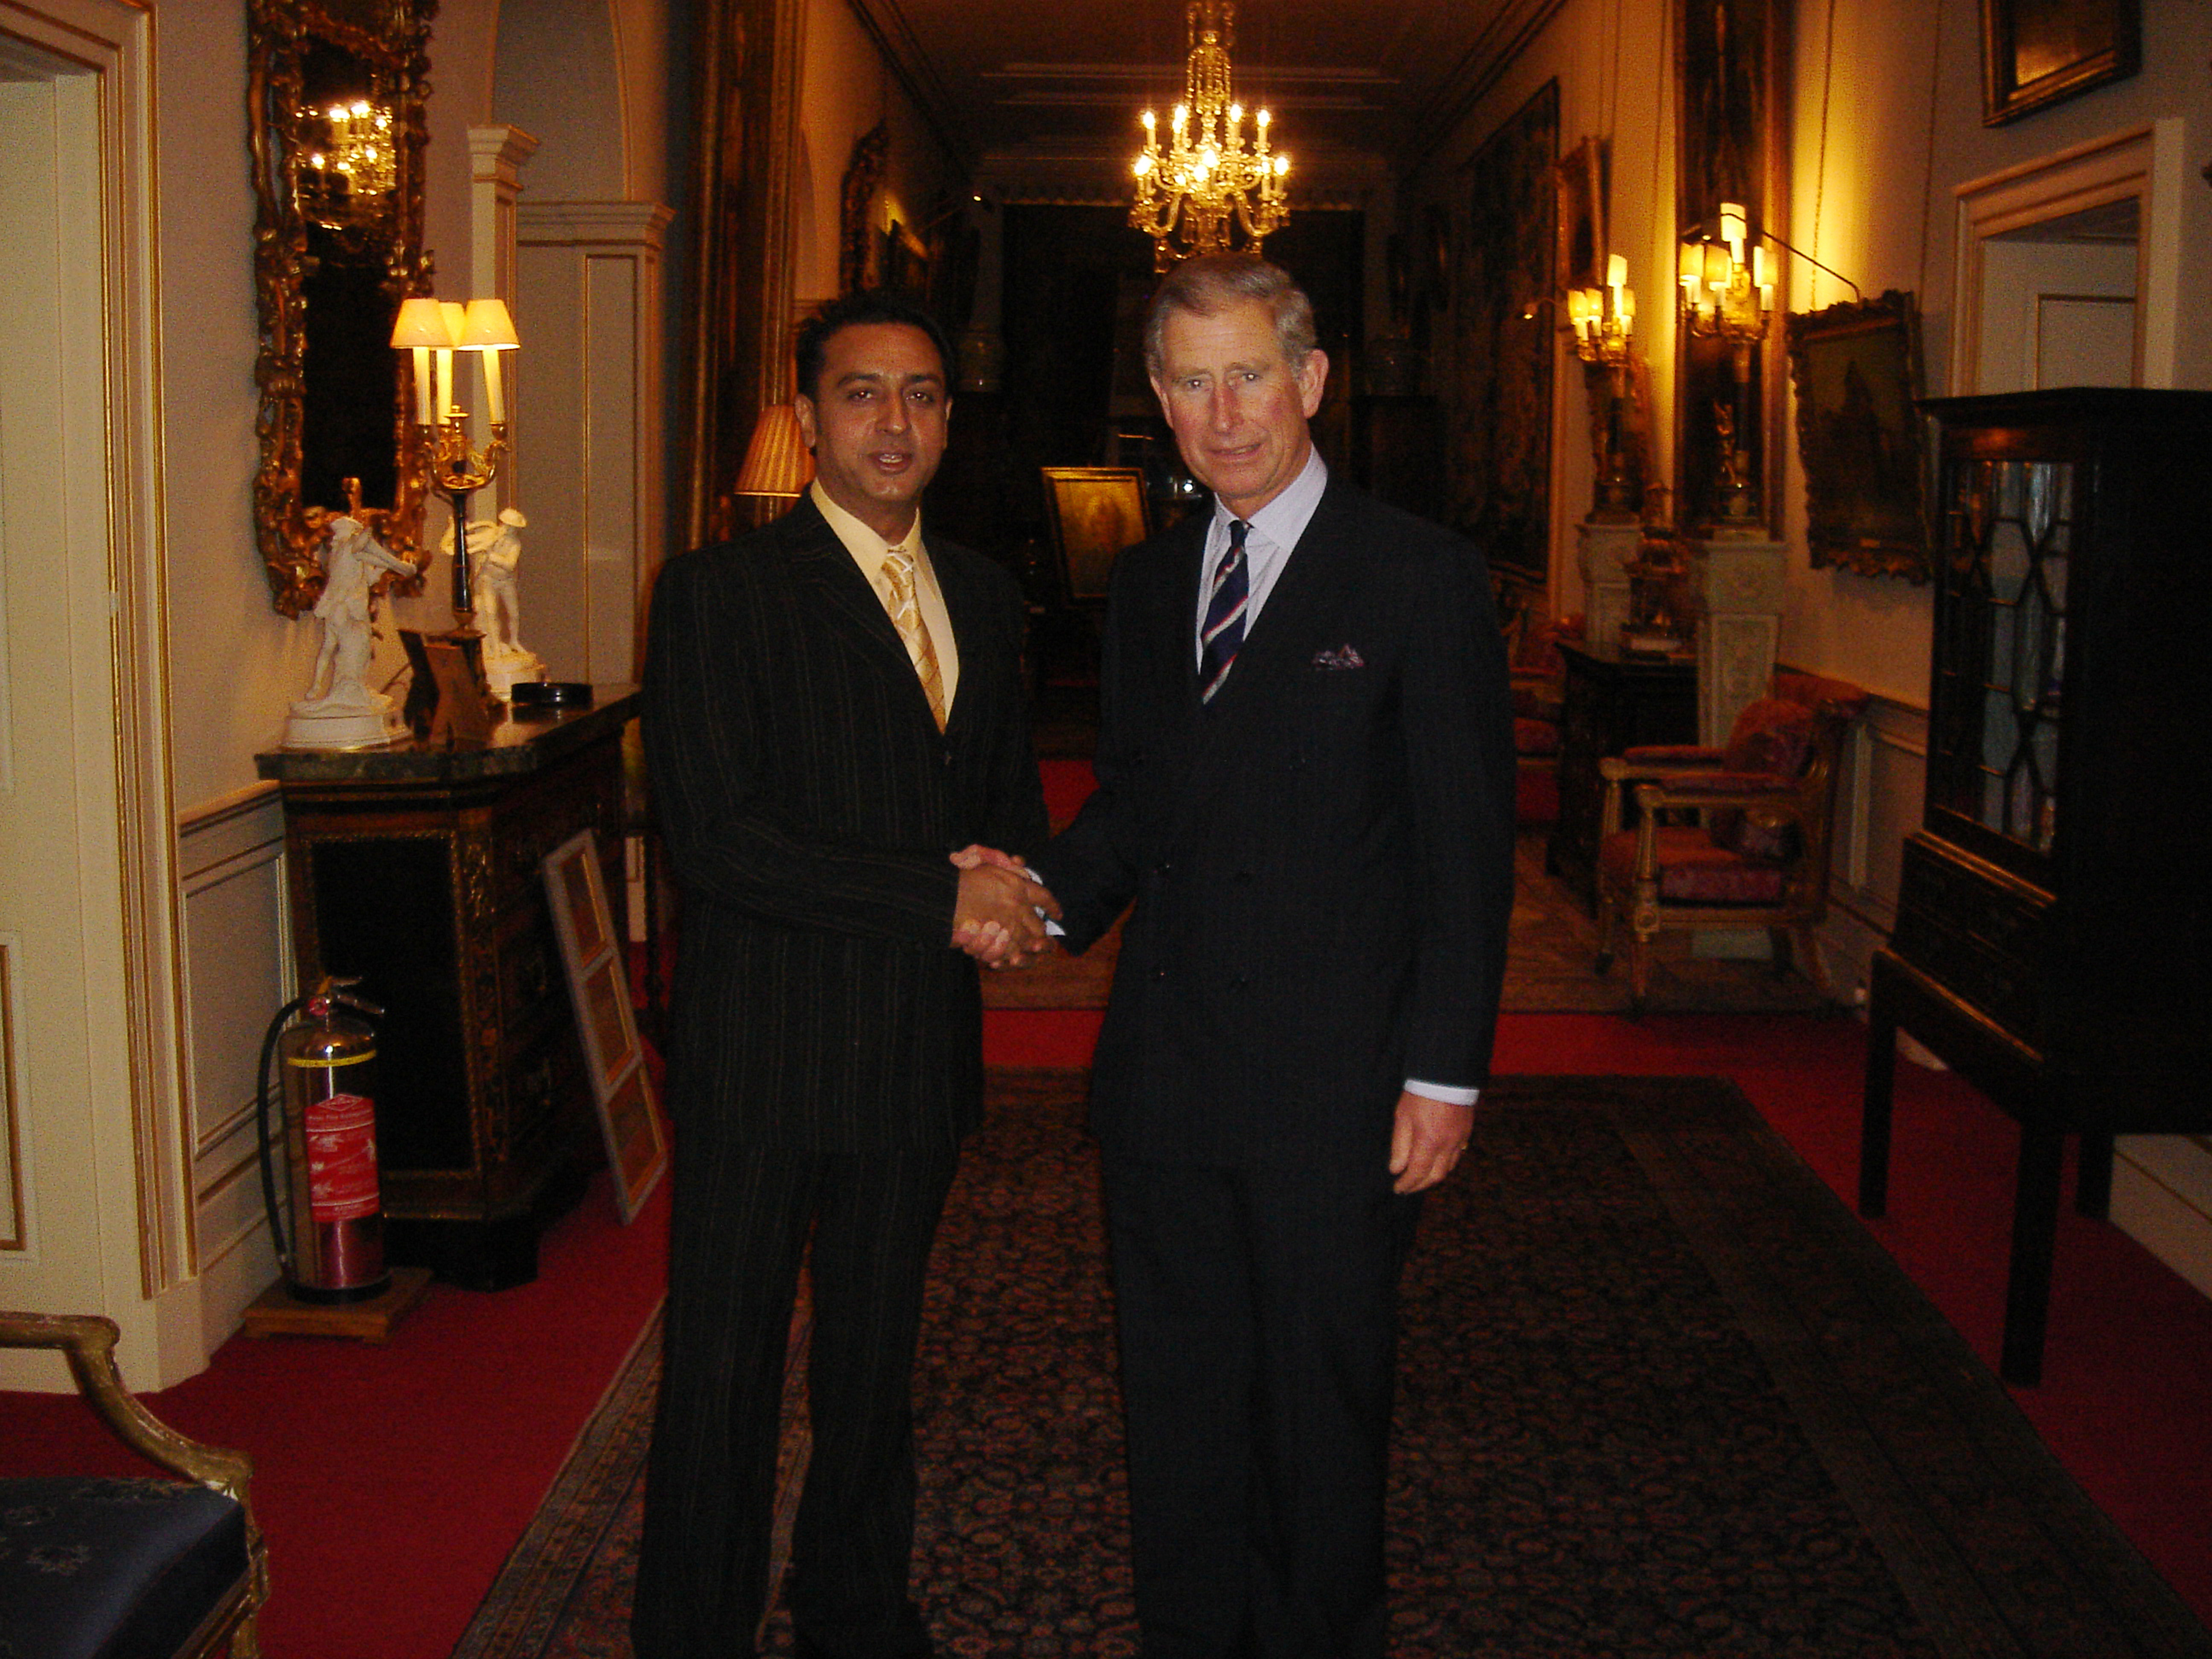 Gulshan Grover with HRH Prince of Wales at Clarence House, London